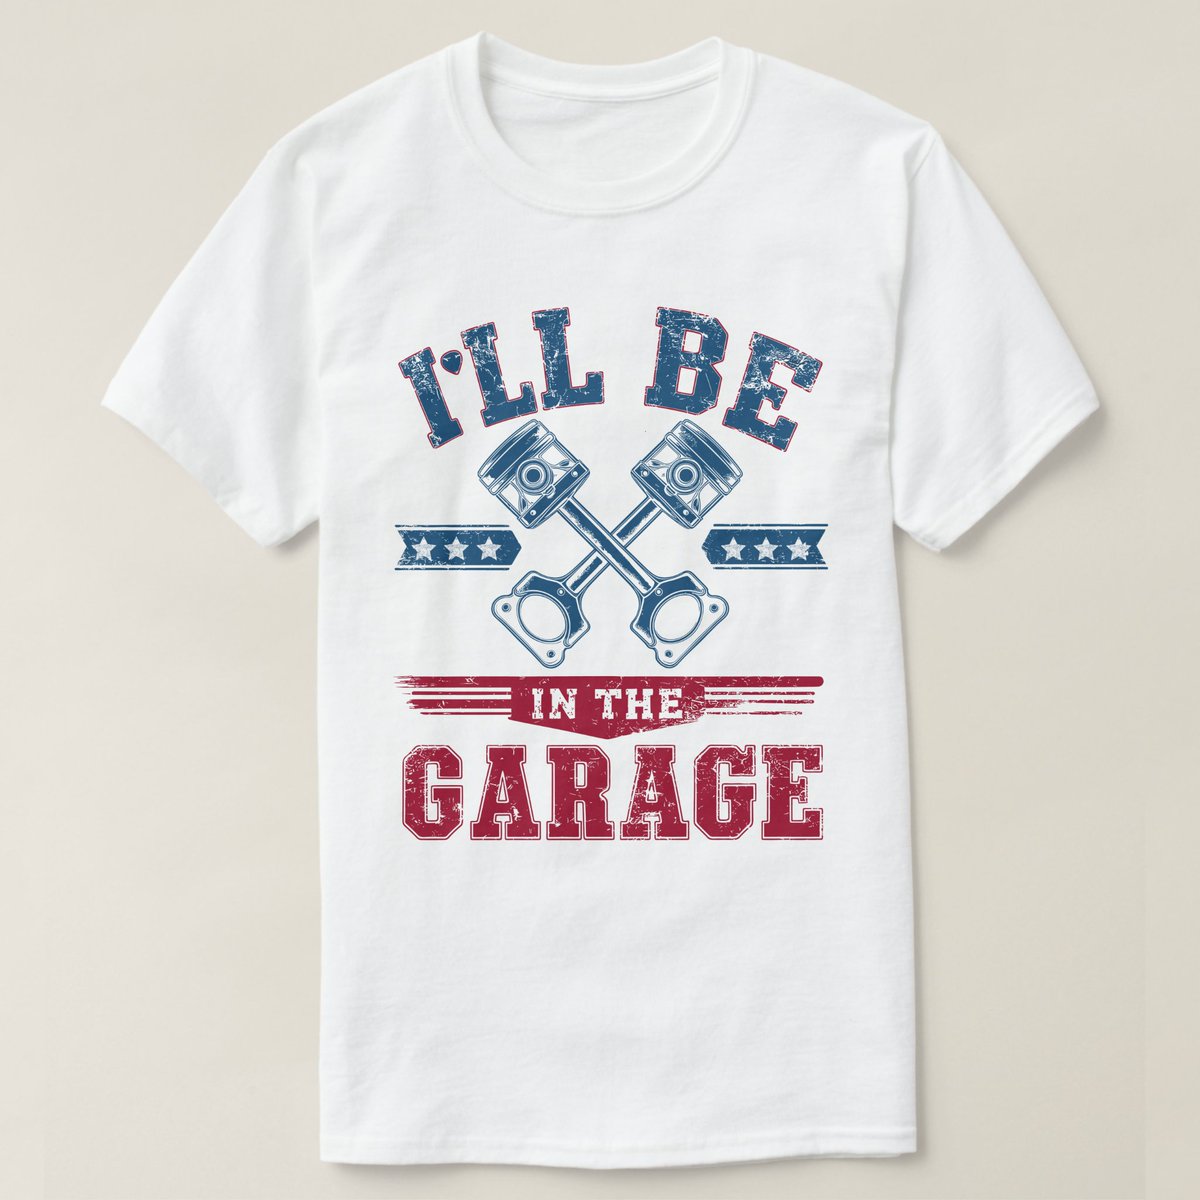 I'll Be In The Garage Car Mechanic Funny Fathers D T-Shirt

zazzle.com/ill_be_in_the_…

#ZazzleMade #zazzlestore #zazzleshop #Zazzle #grandpa #dad #mechaniclife #mechanic #mechanicshop #America 

Celebrates the classic charm of the garage and the skilled hands of auto mechanics.